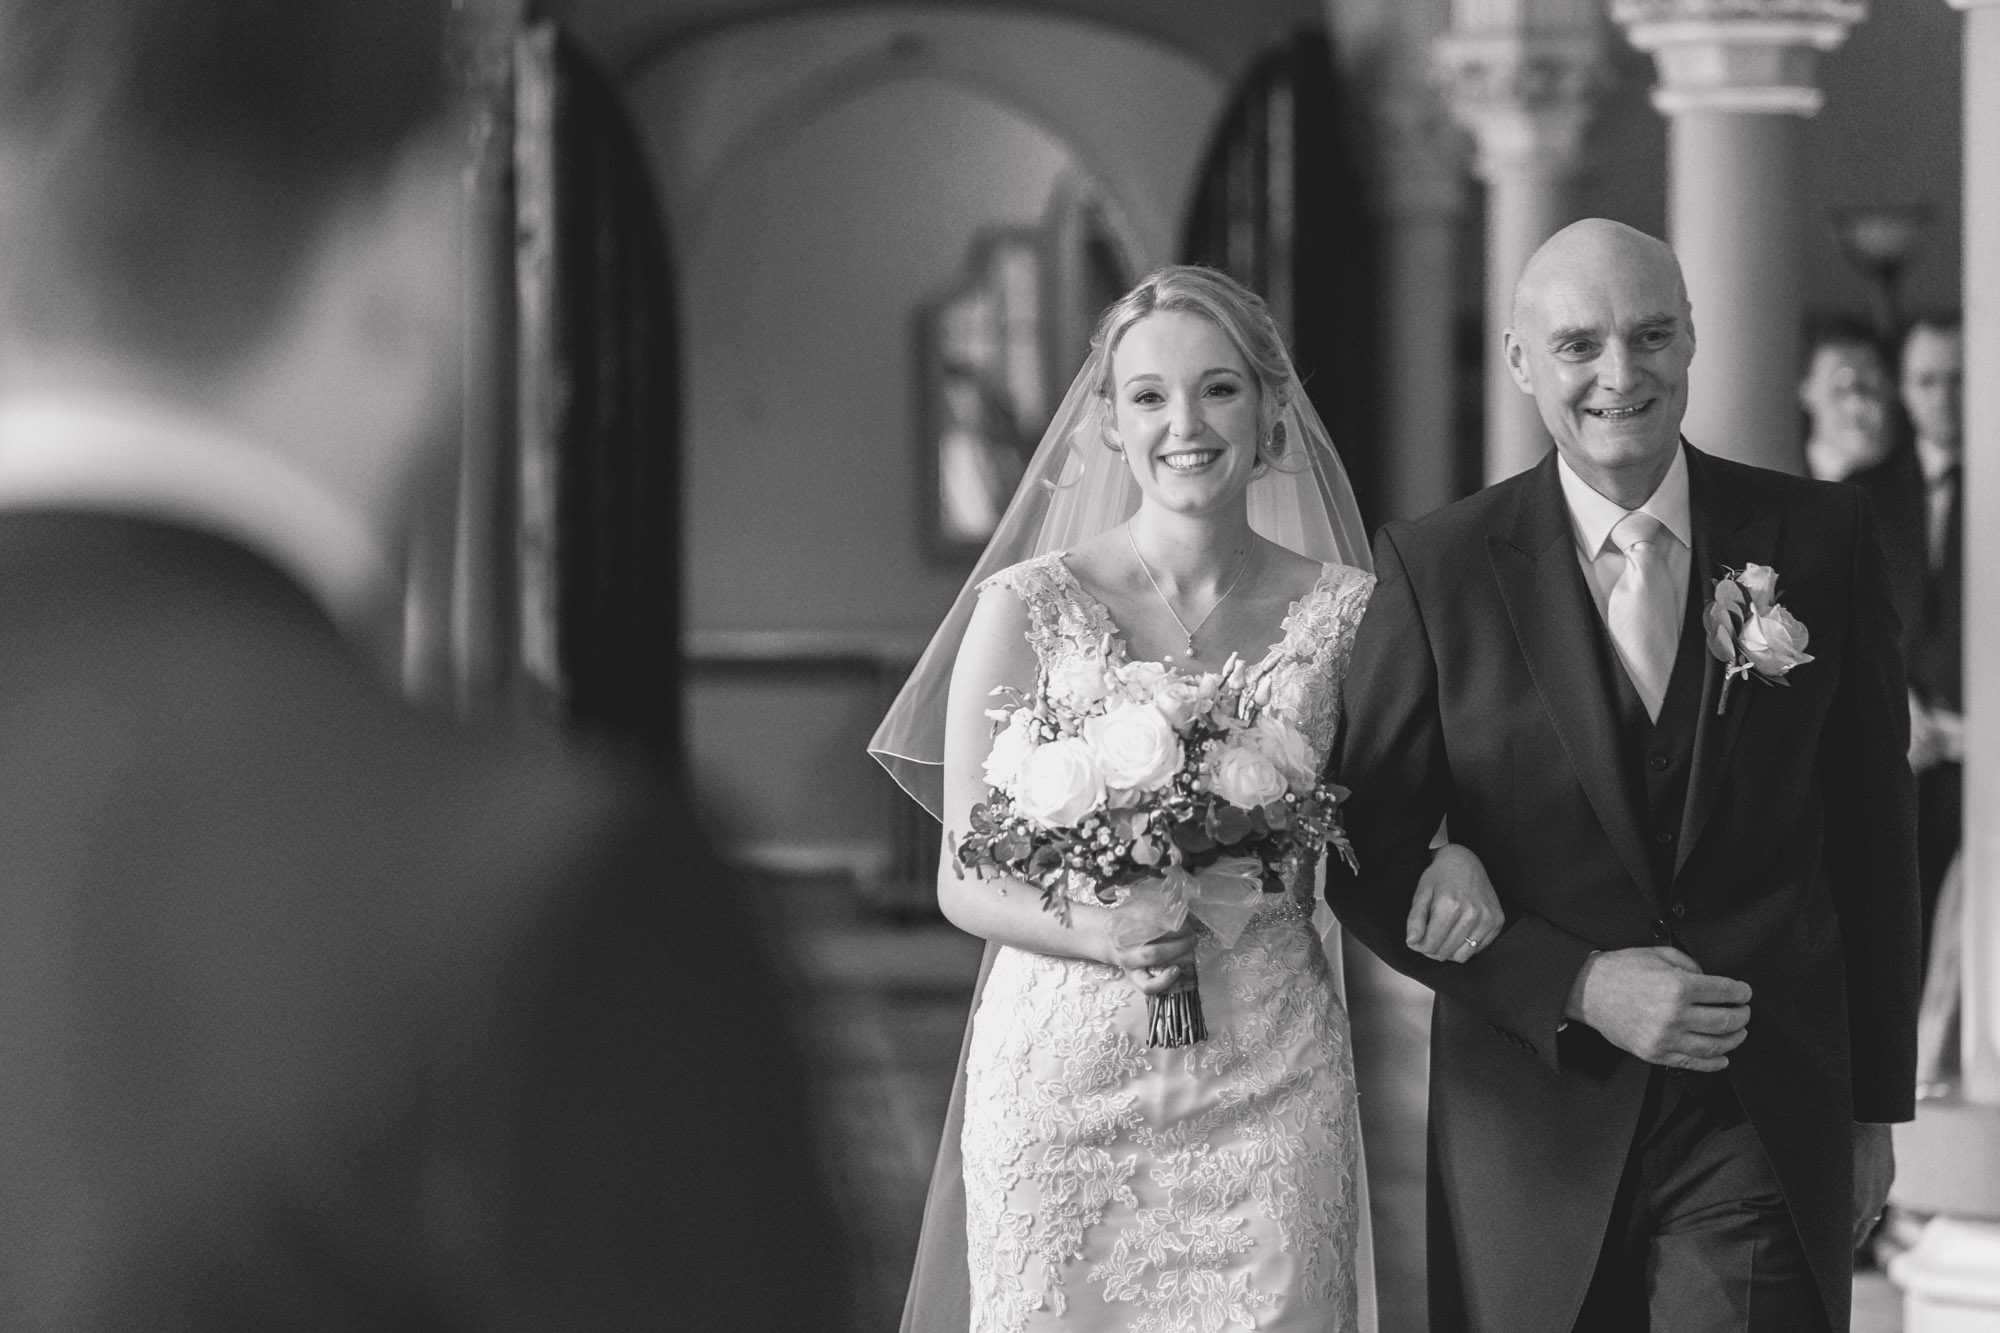 A bride walks down the aisle with her father in the Old Library at Wotton House in Surrey.